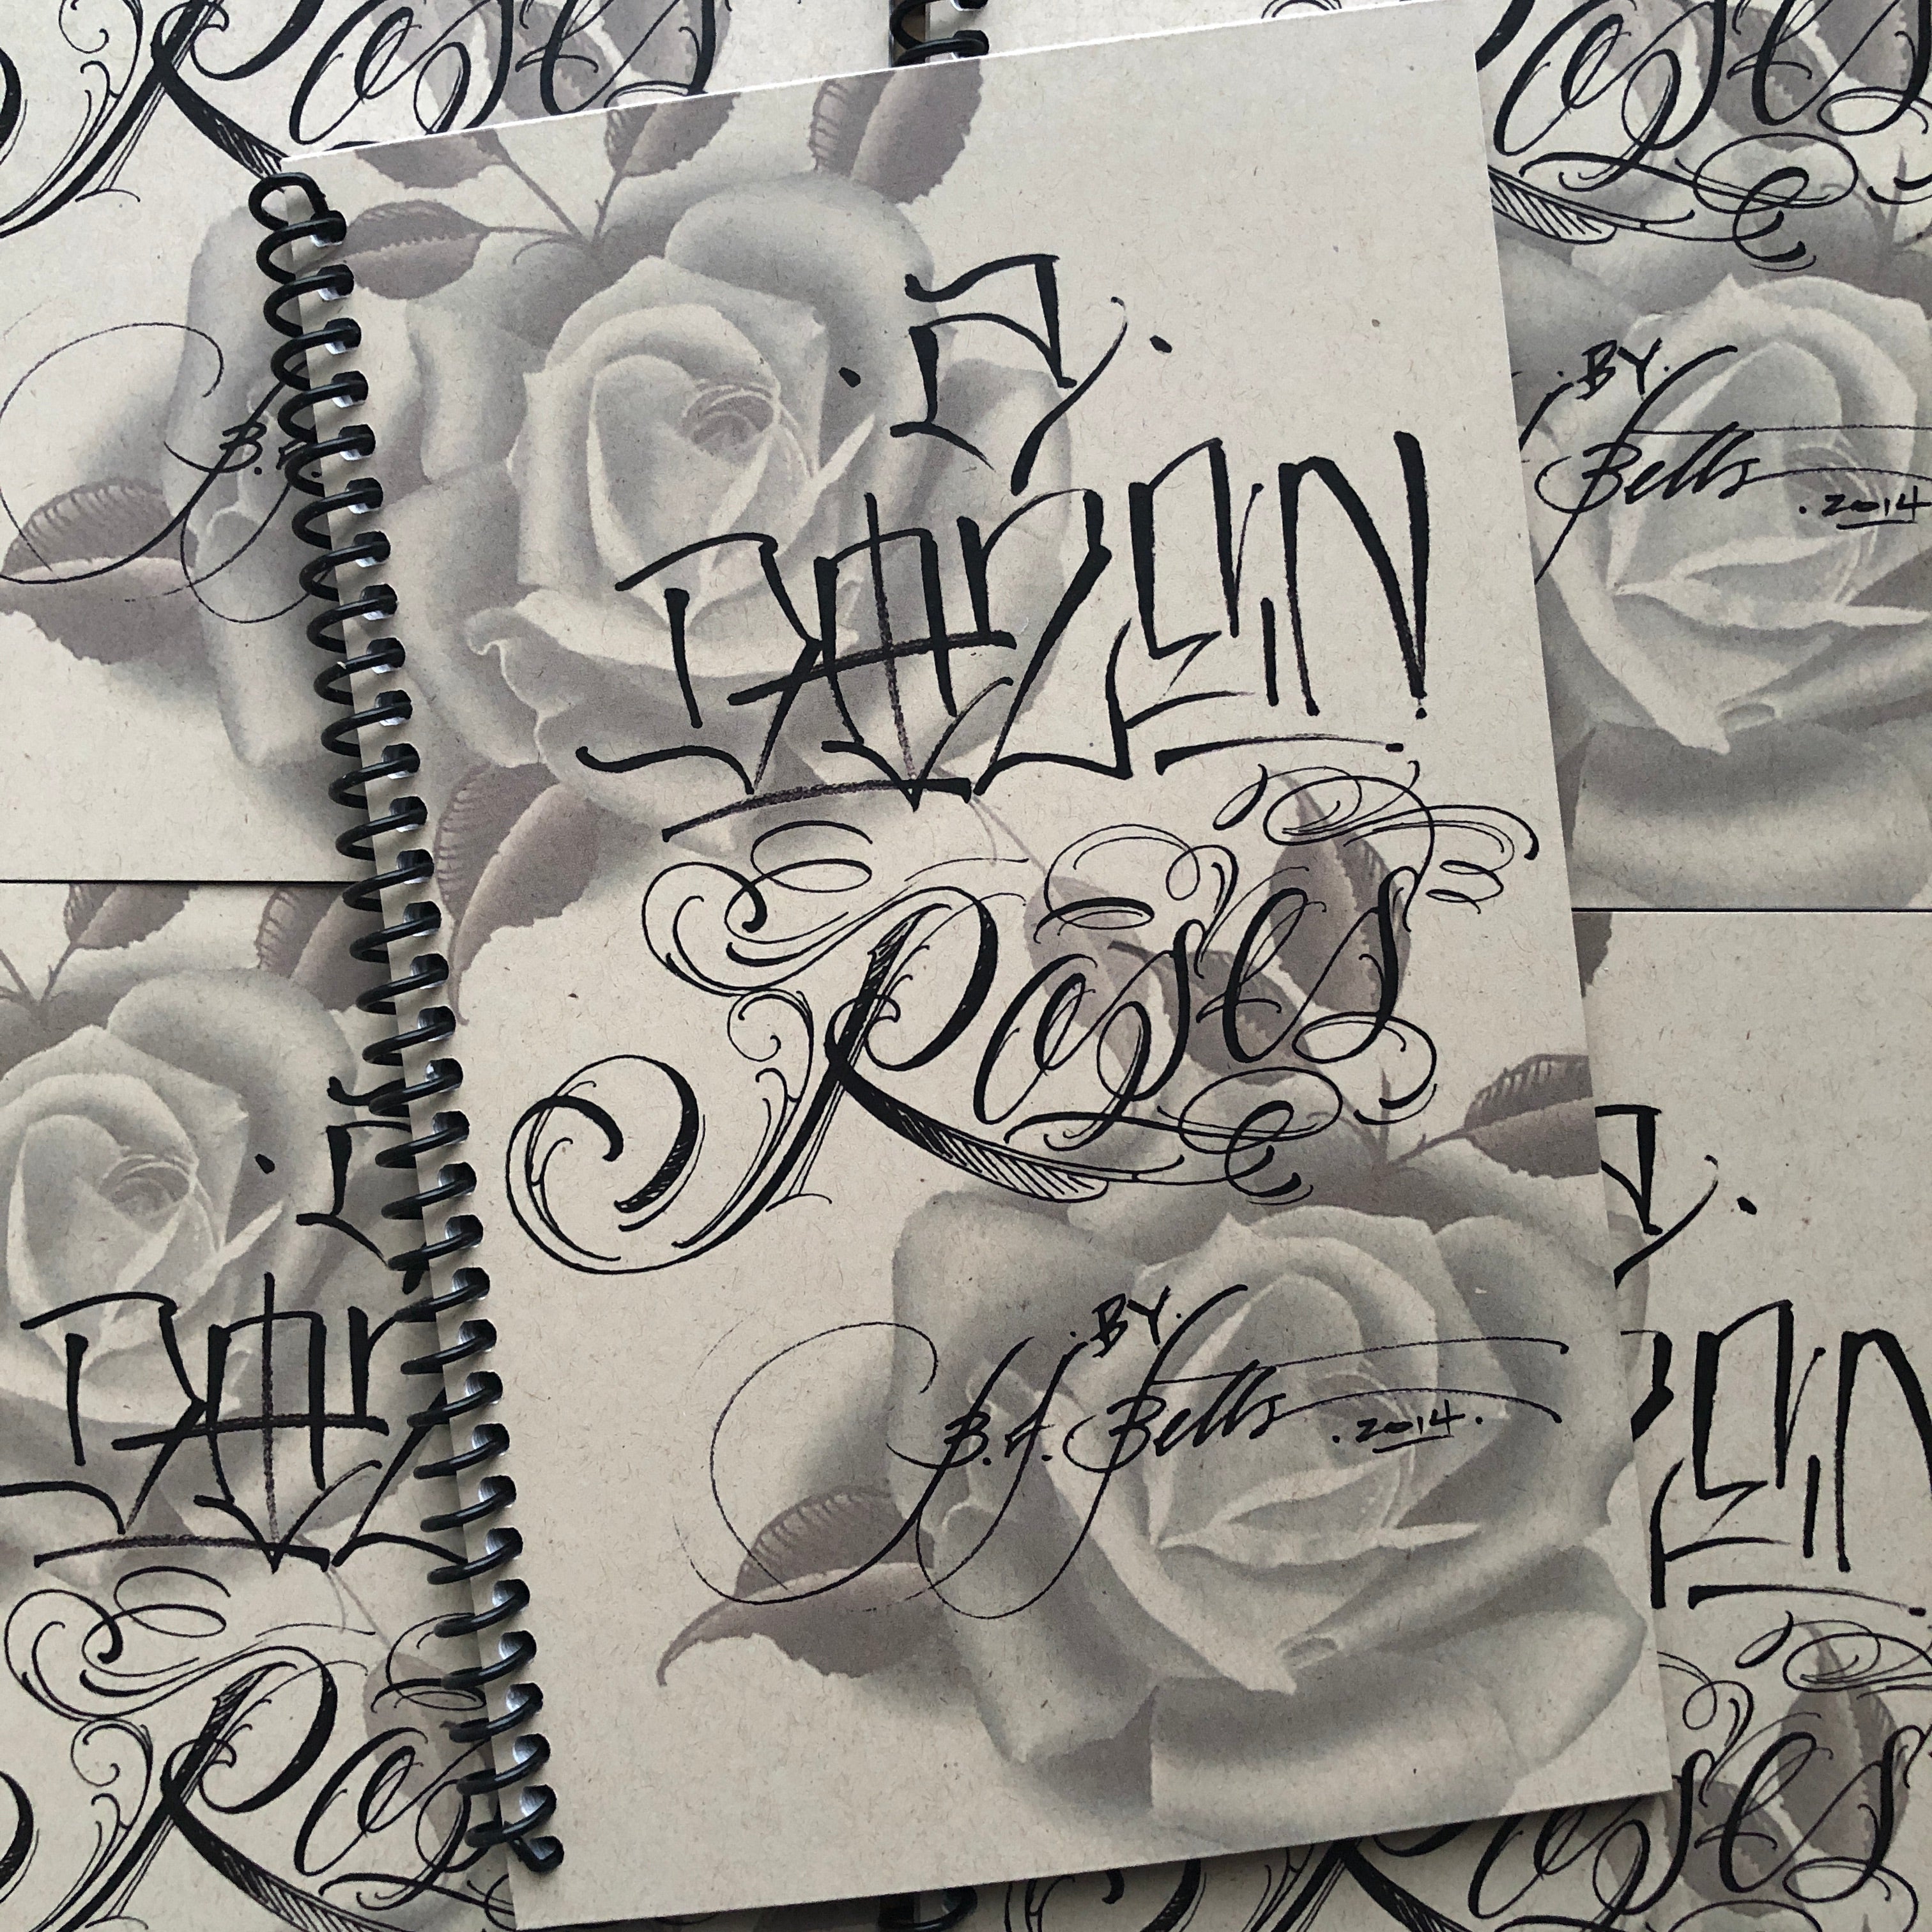 chicano roses drawings